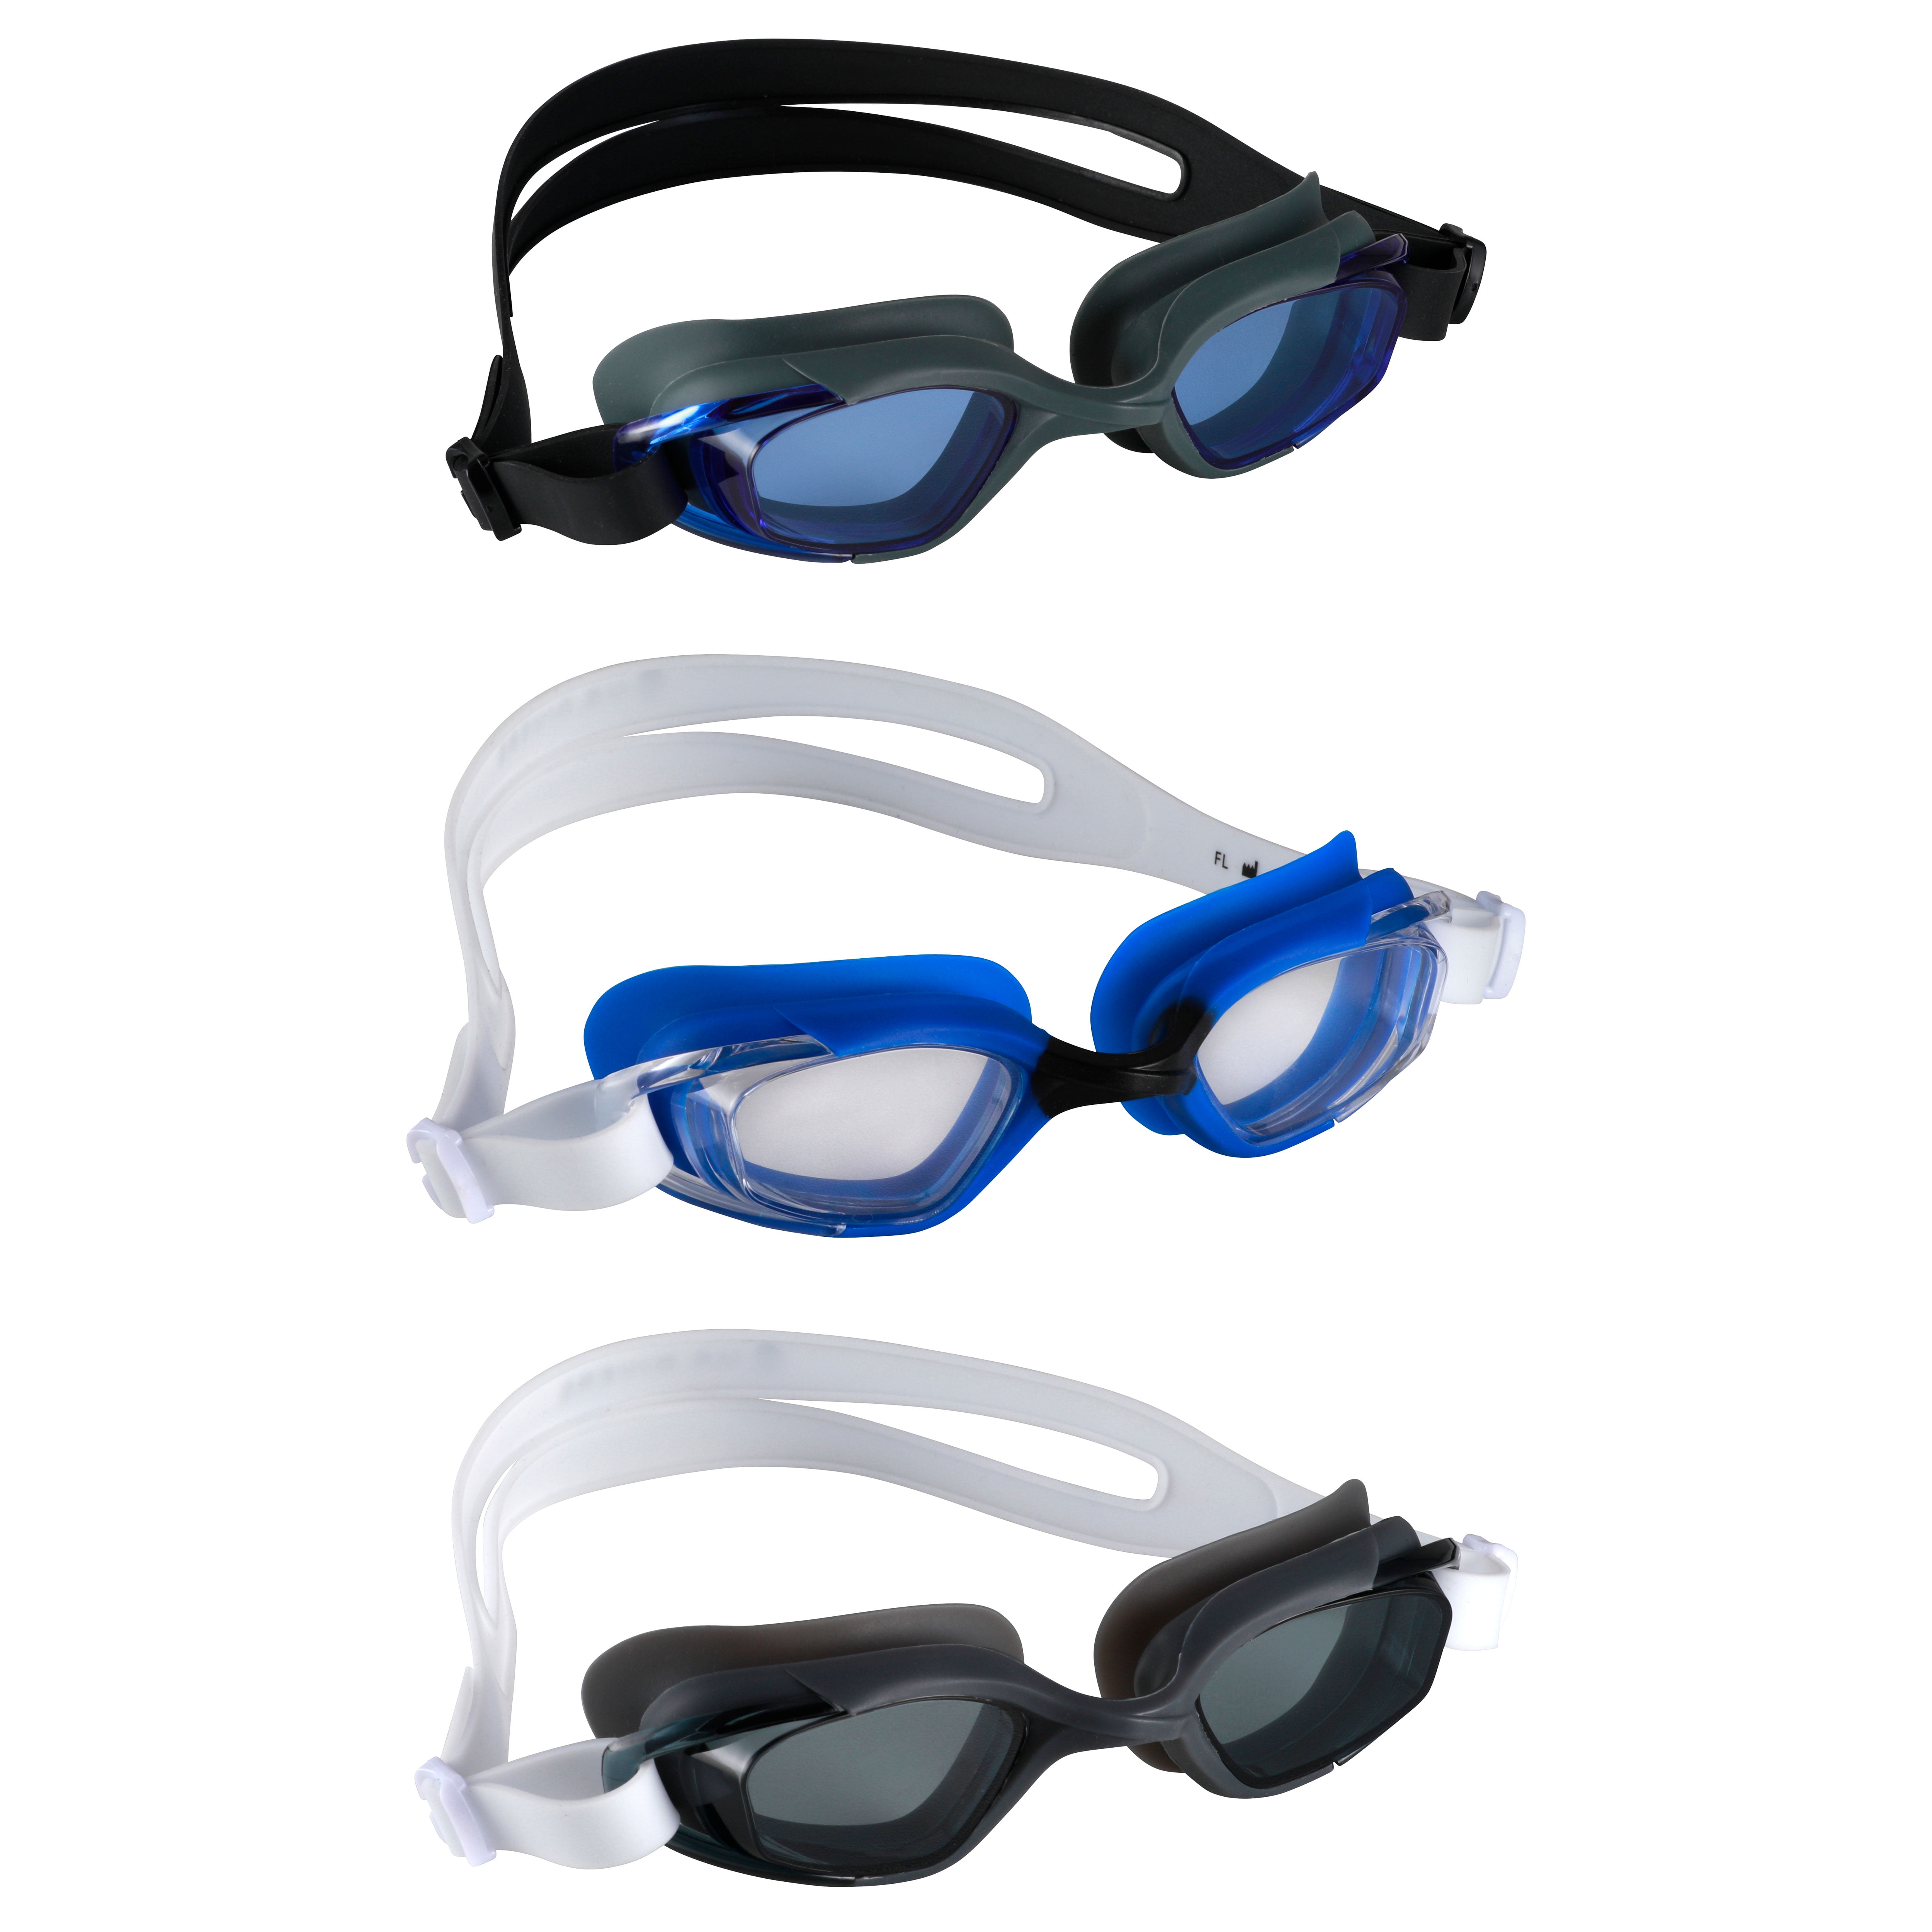 Adult Swimming Goggles Diving Glasses Anti-UV Adjustable 180 Degree Wide View US 